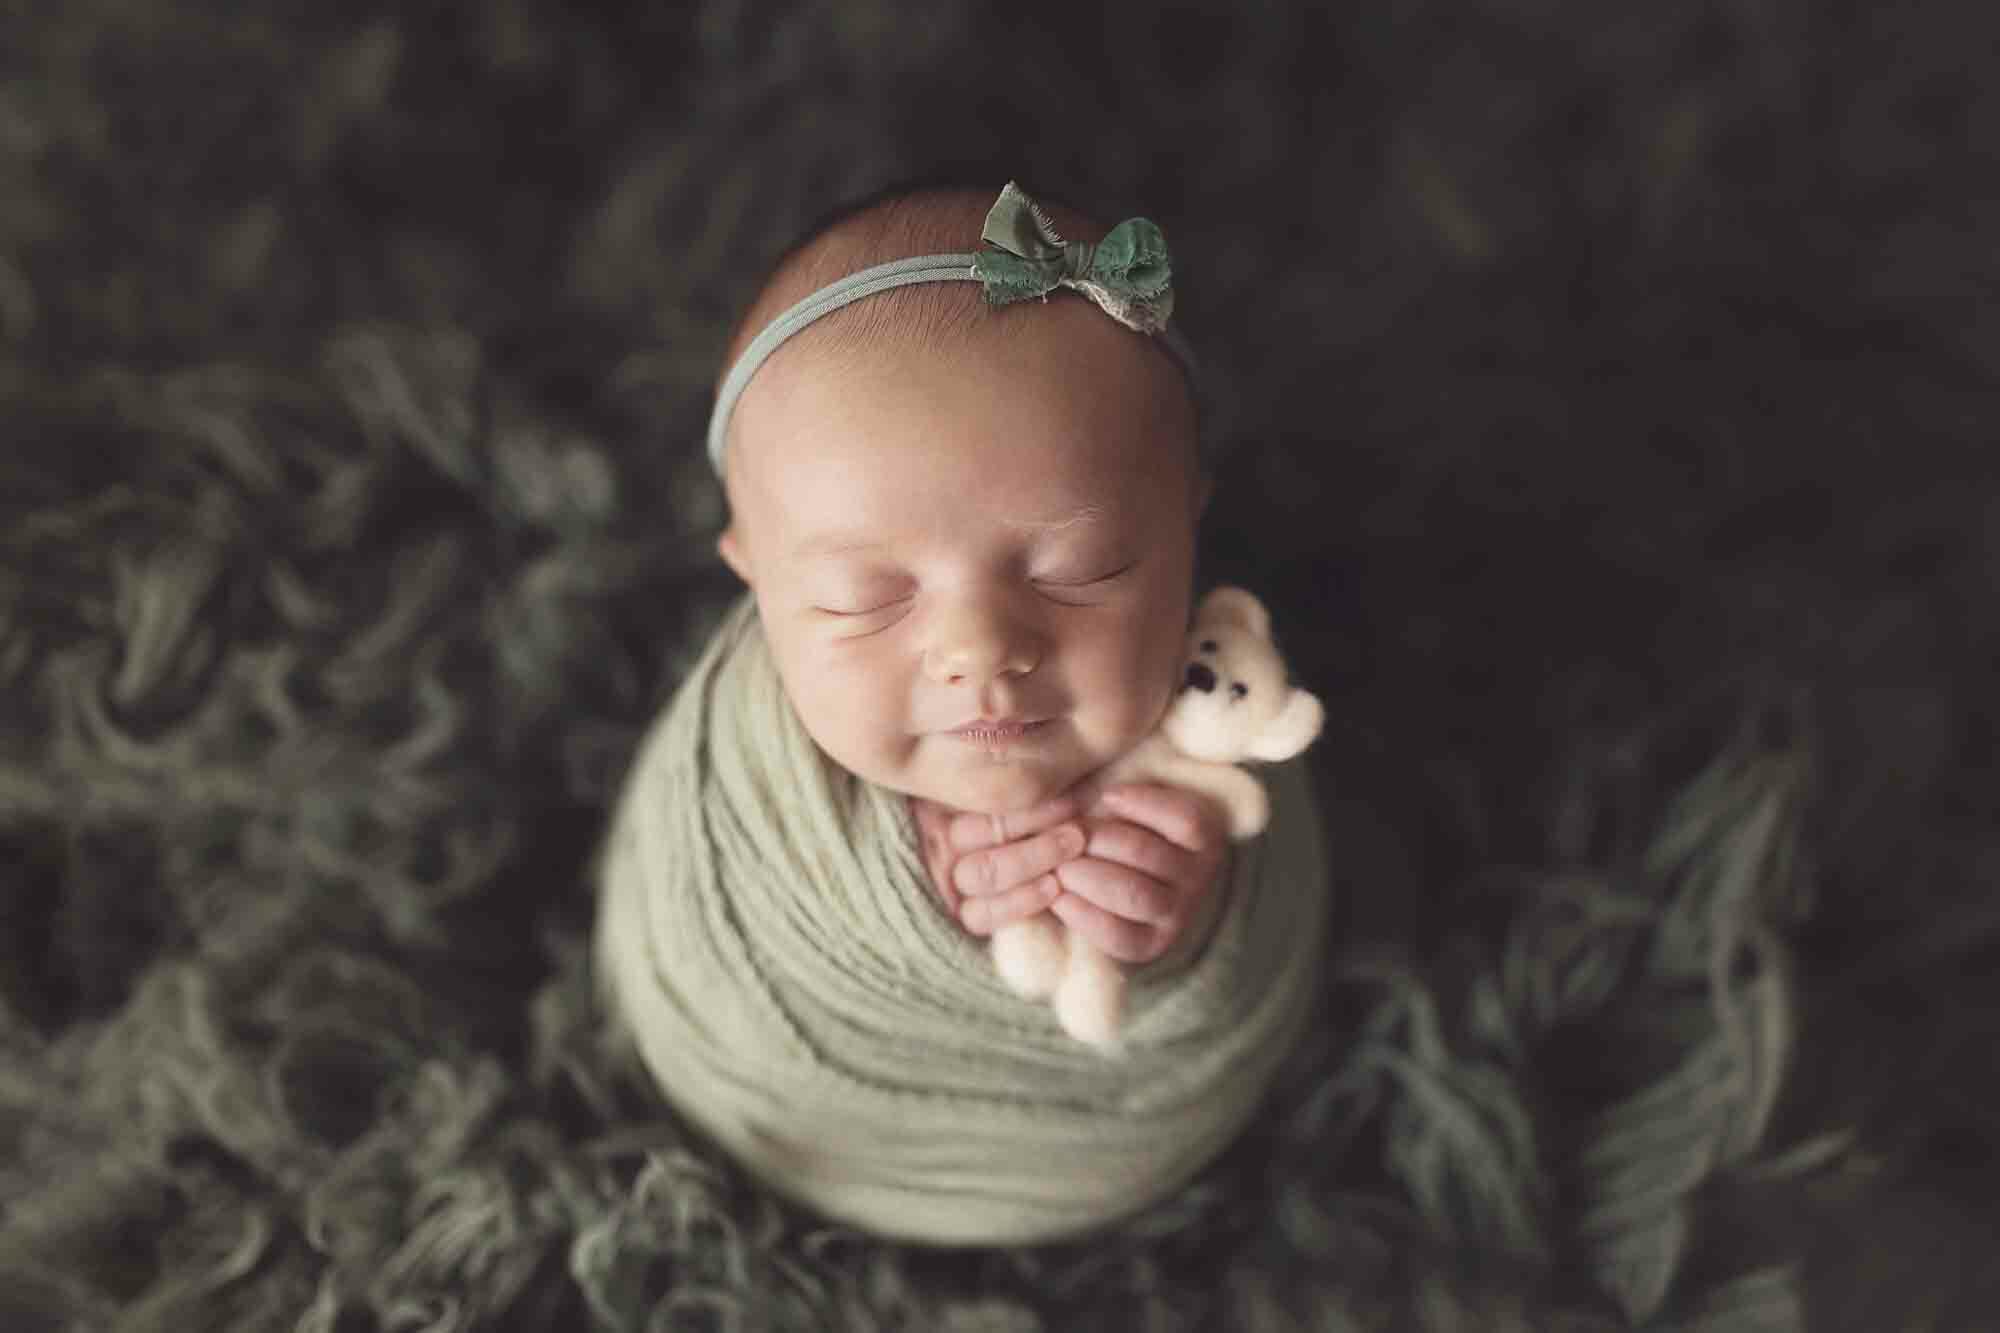 How to choose the best newborn photographer for you.